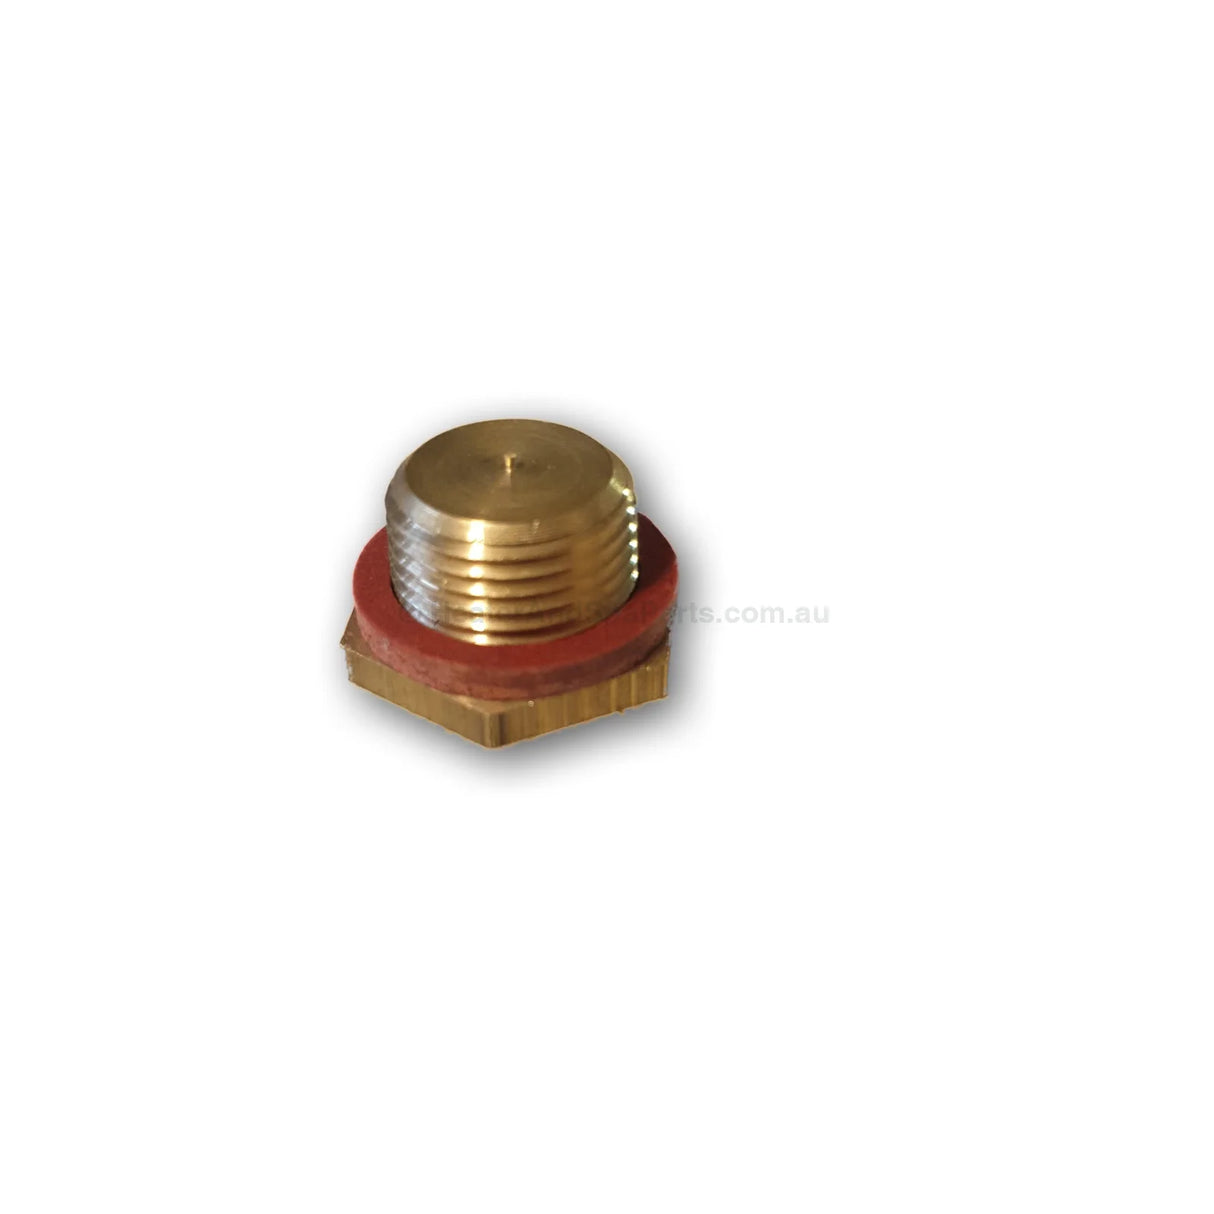 Astralpool Hurlcon Brass Plug for Hi-Limit Switches HX, JX, Viron, MX, HiNRG - also Jacuzzi - Heater and Spa Parts